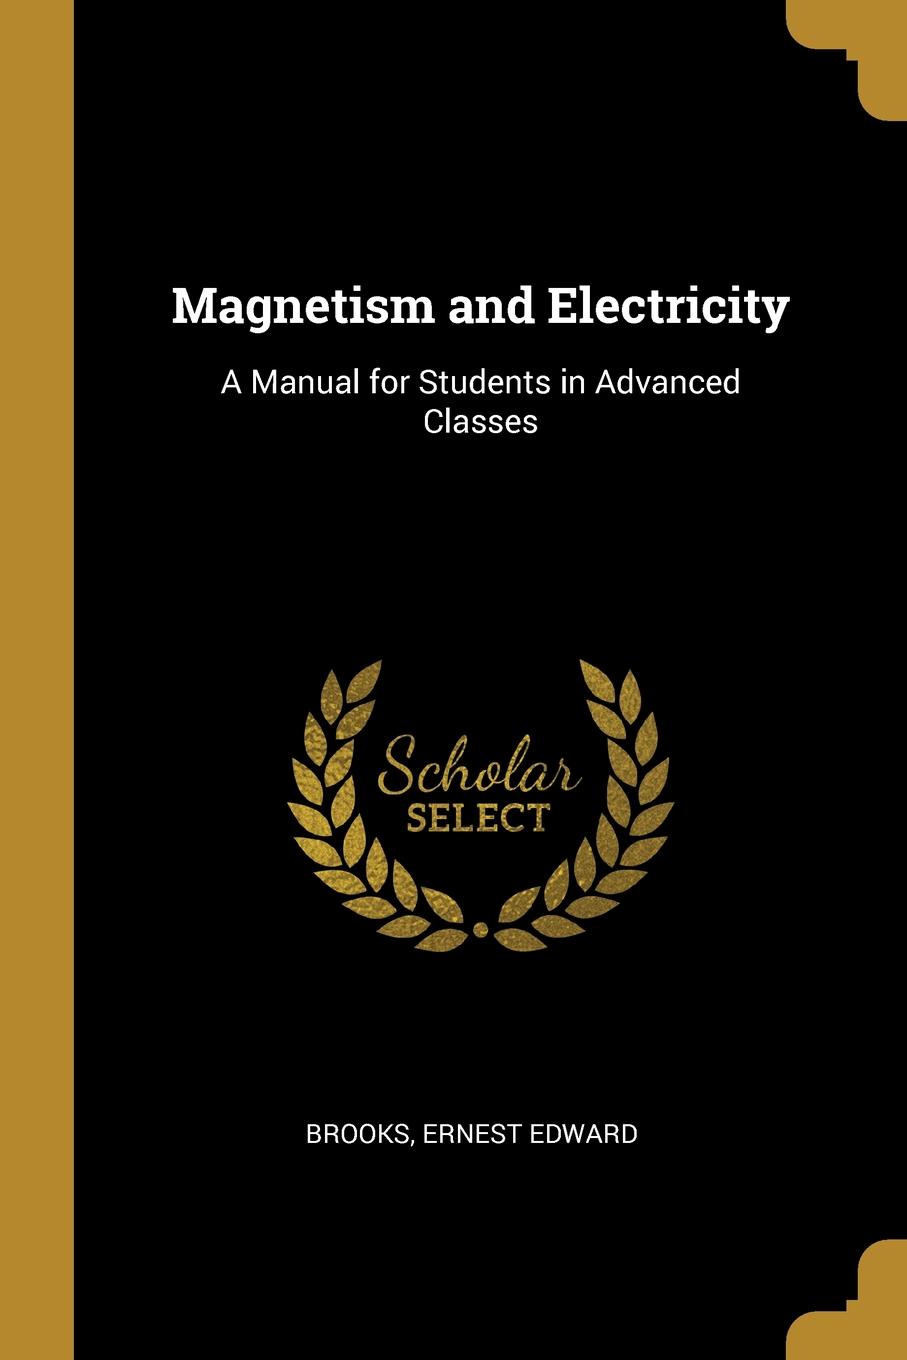 Magnetism and Electricity. A Manual for Students in Advanced Classes